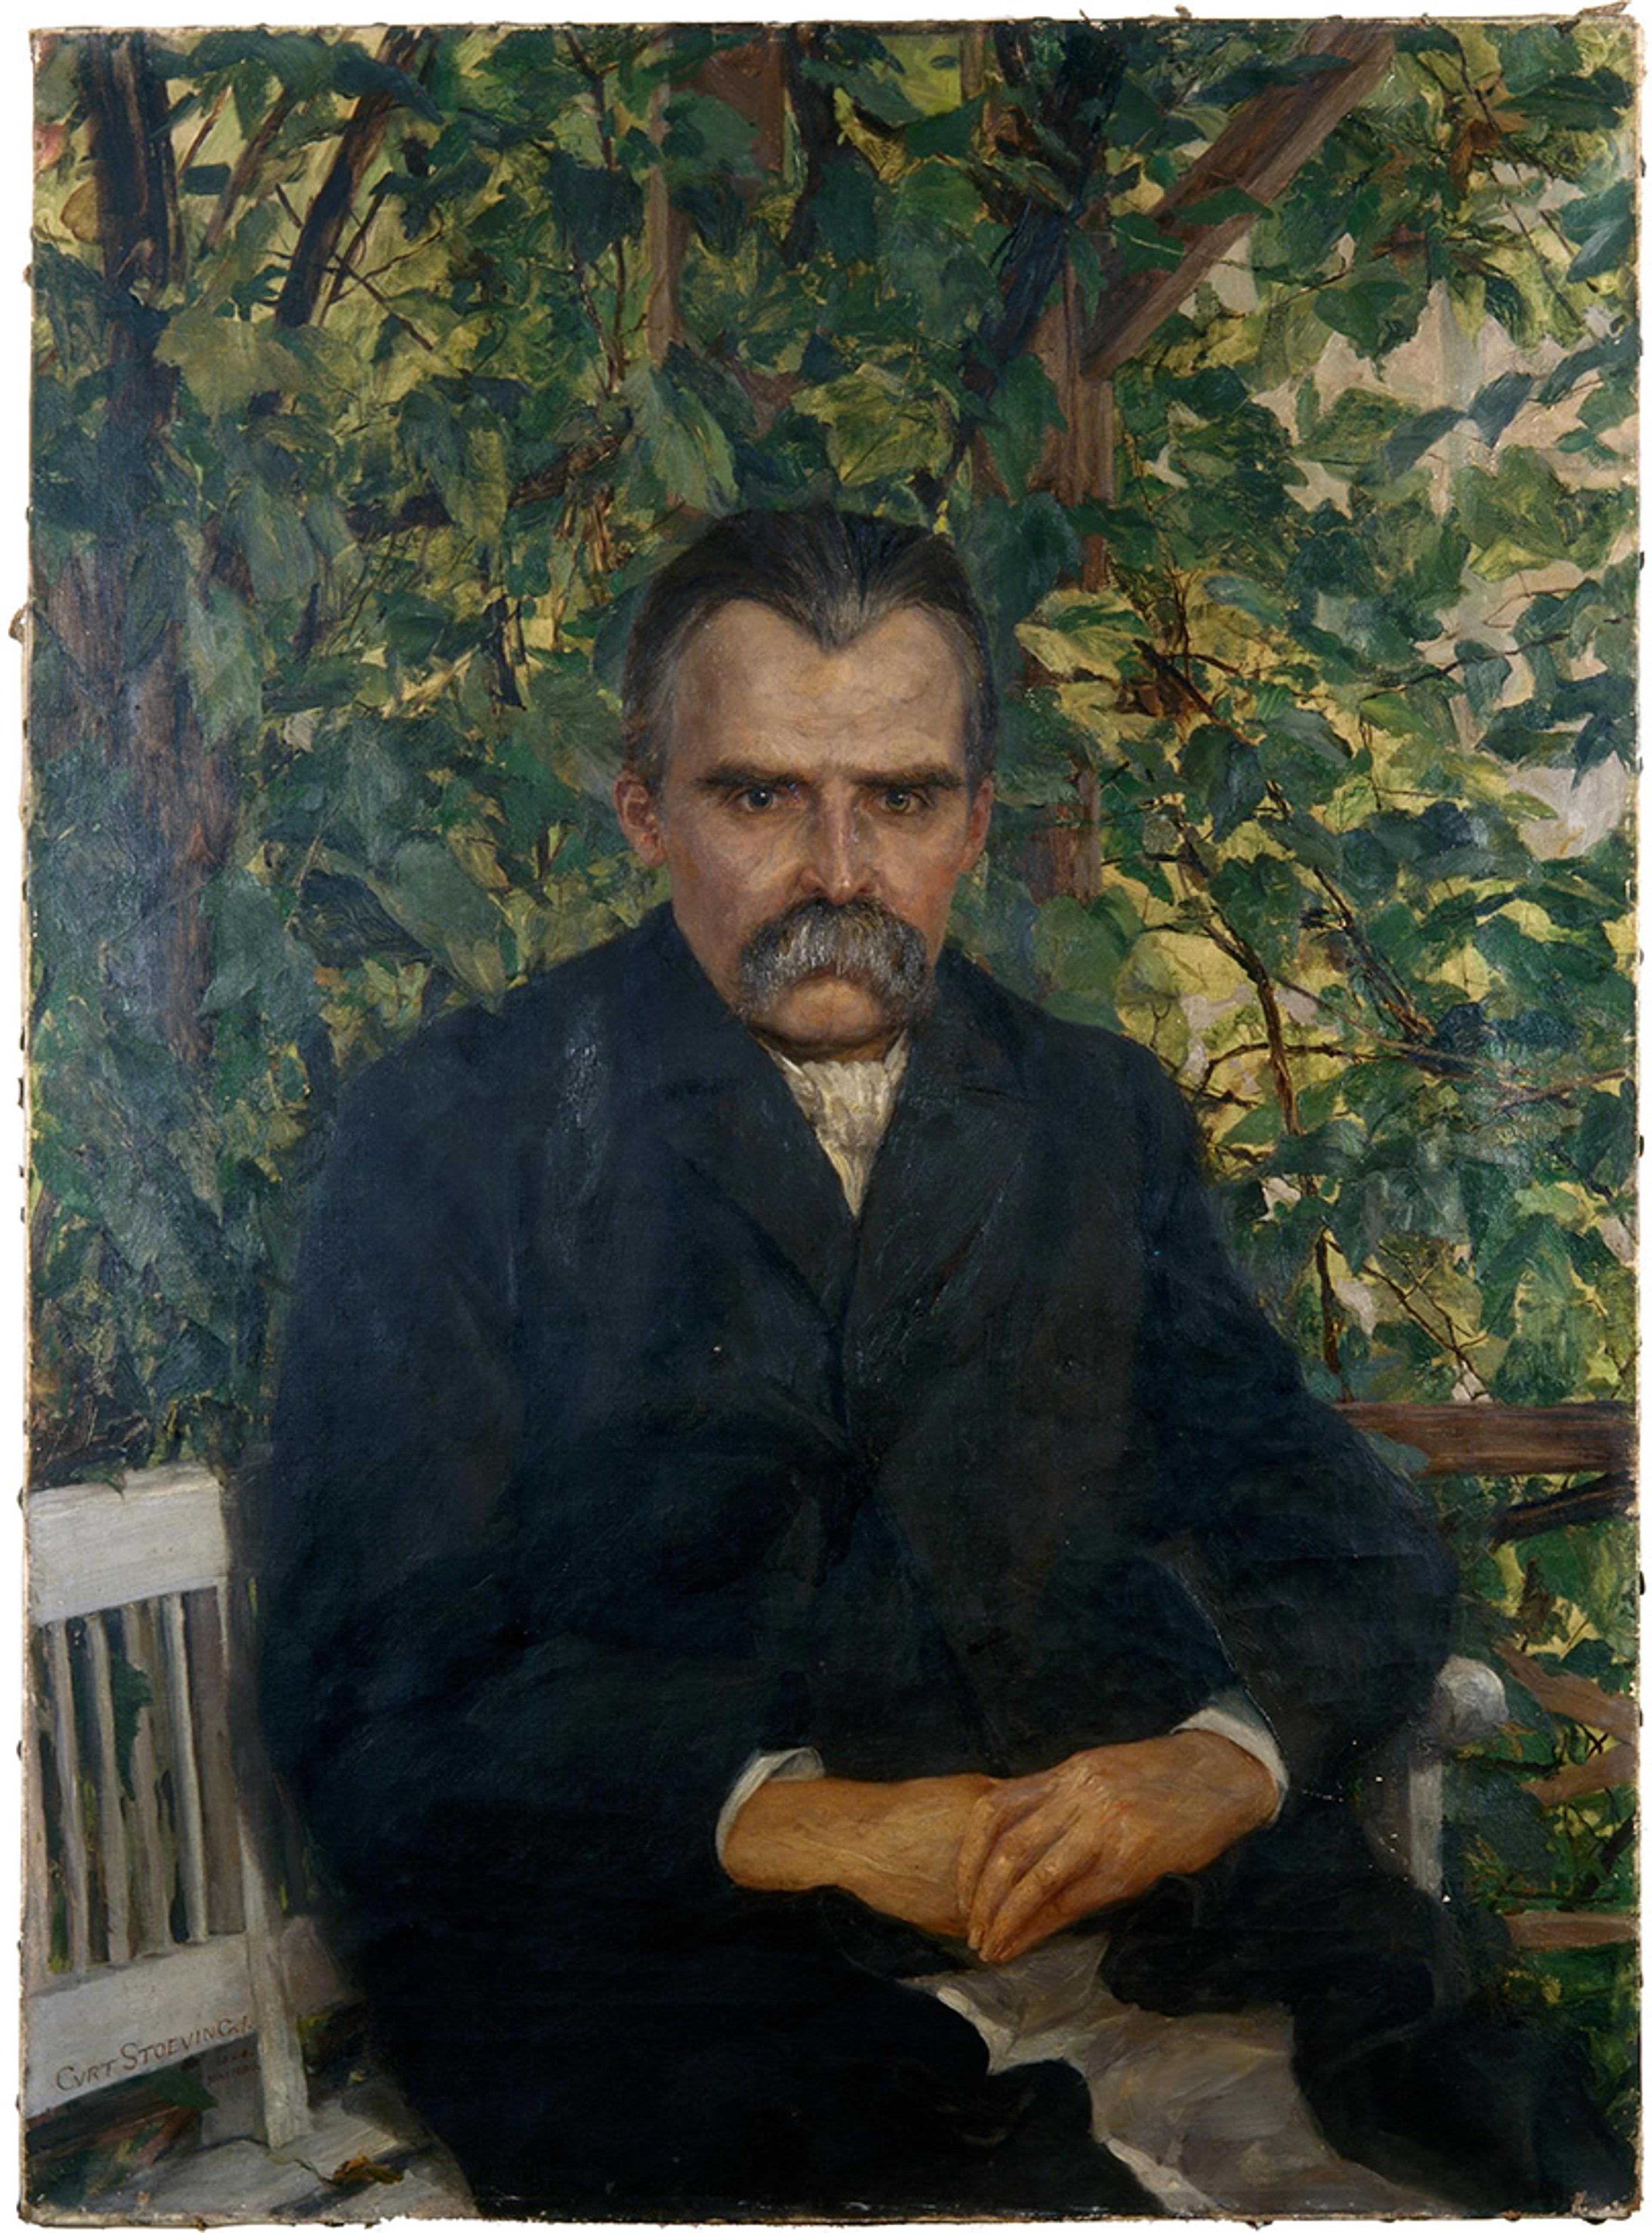 Painted portrait of a seated man with a stern expression, wearing a dark suit, set against a backdrop of dense green foliage.